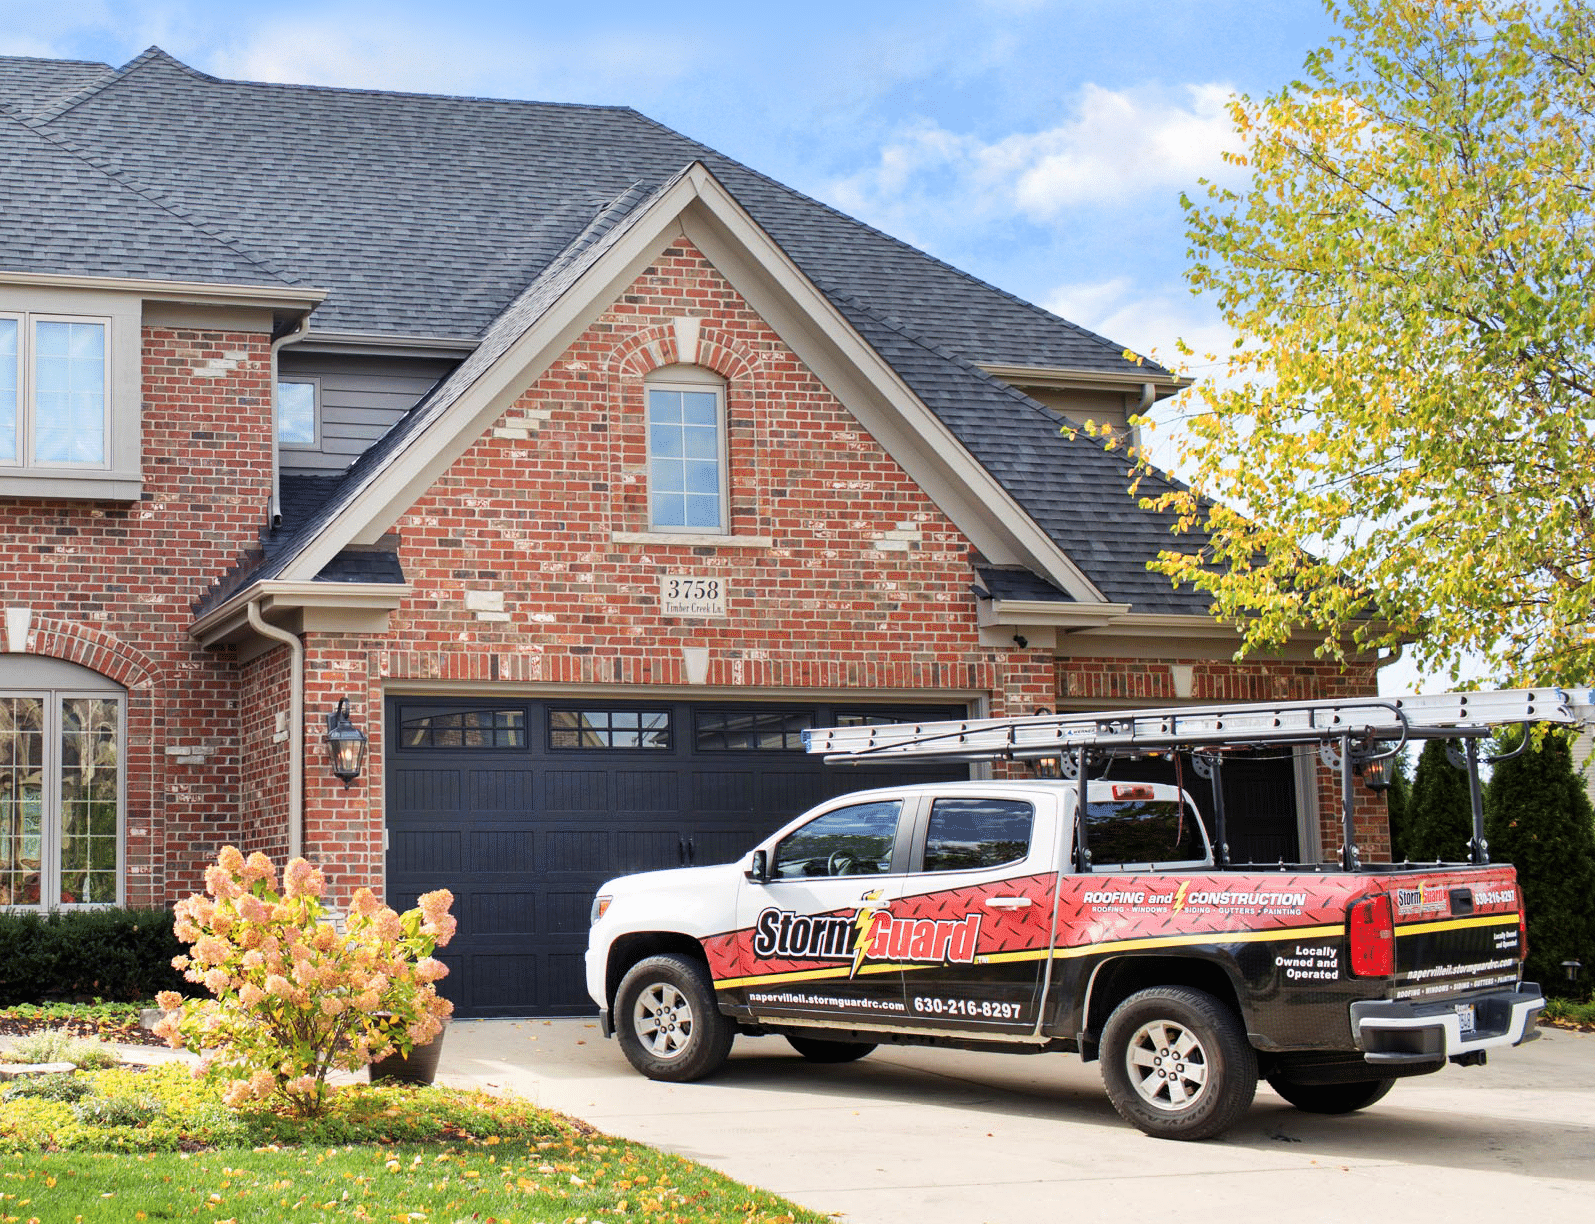 Brick House with Storm Guard Restoration Services Truck In Driveway - Metro Detroit North